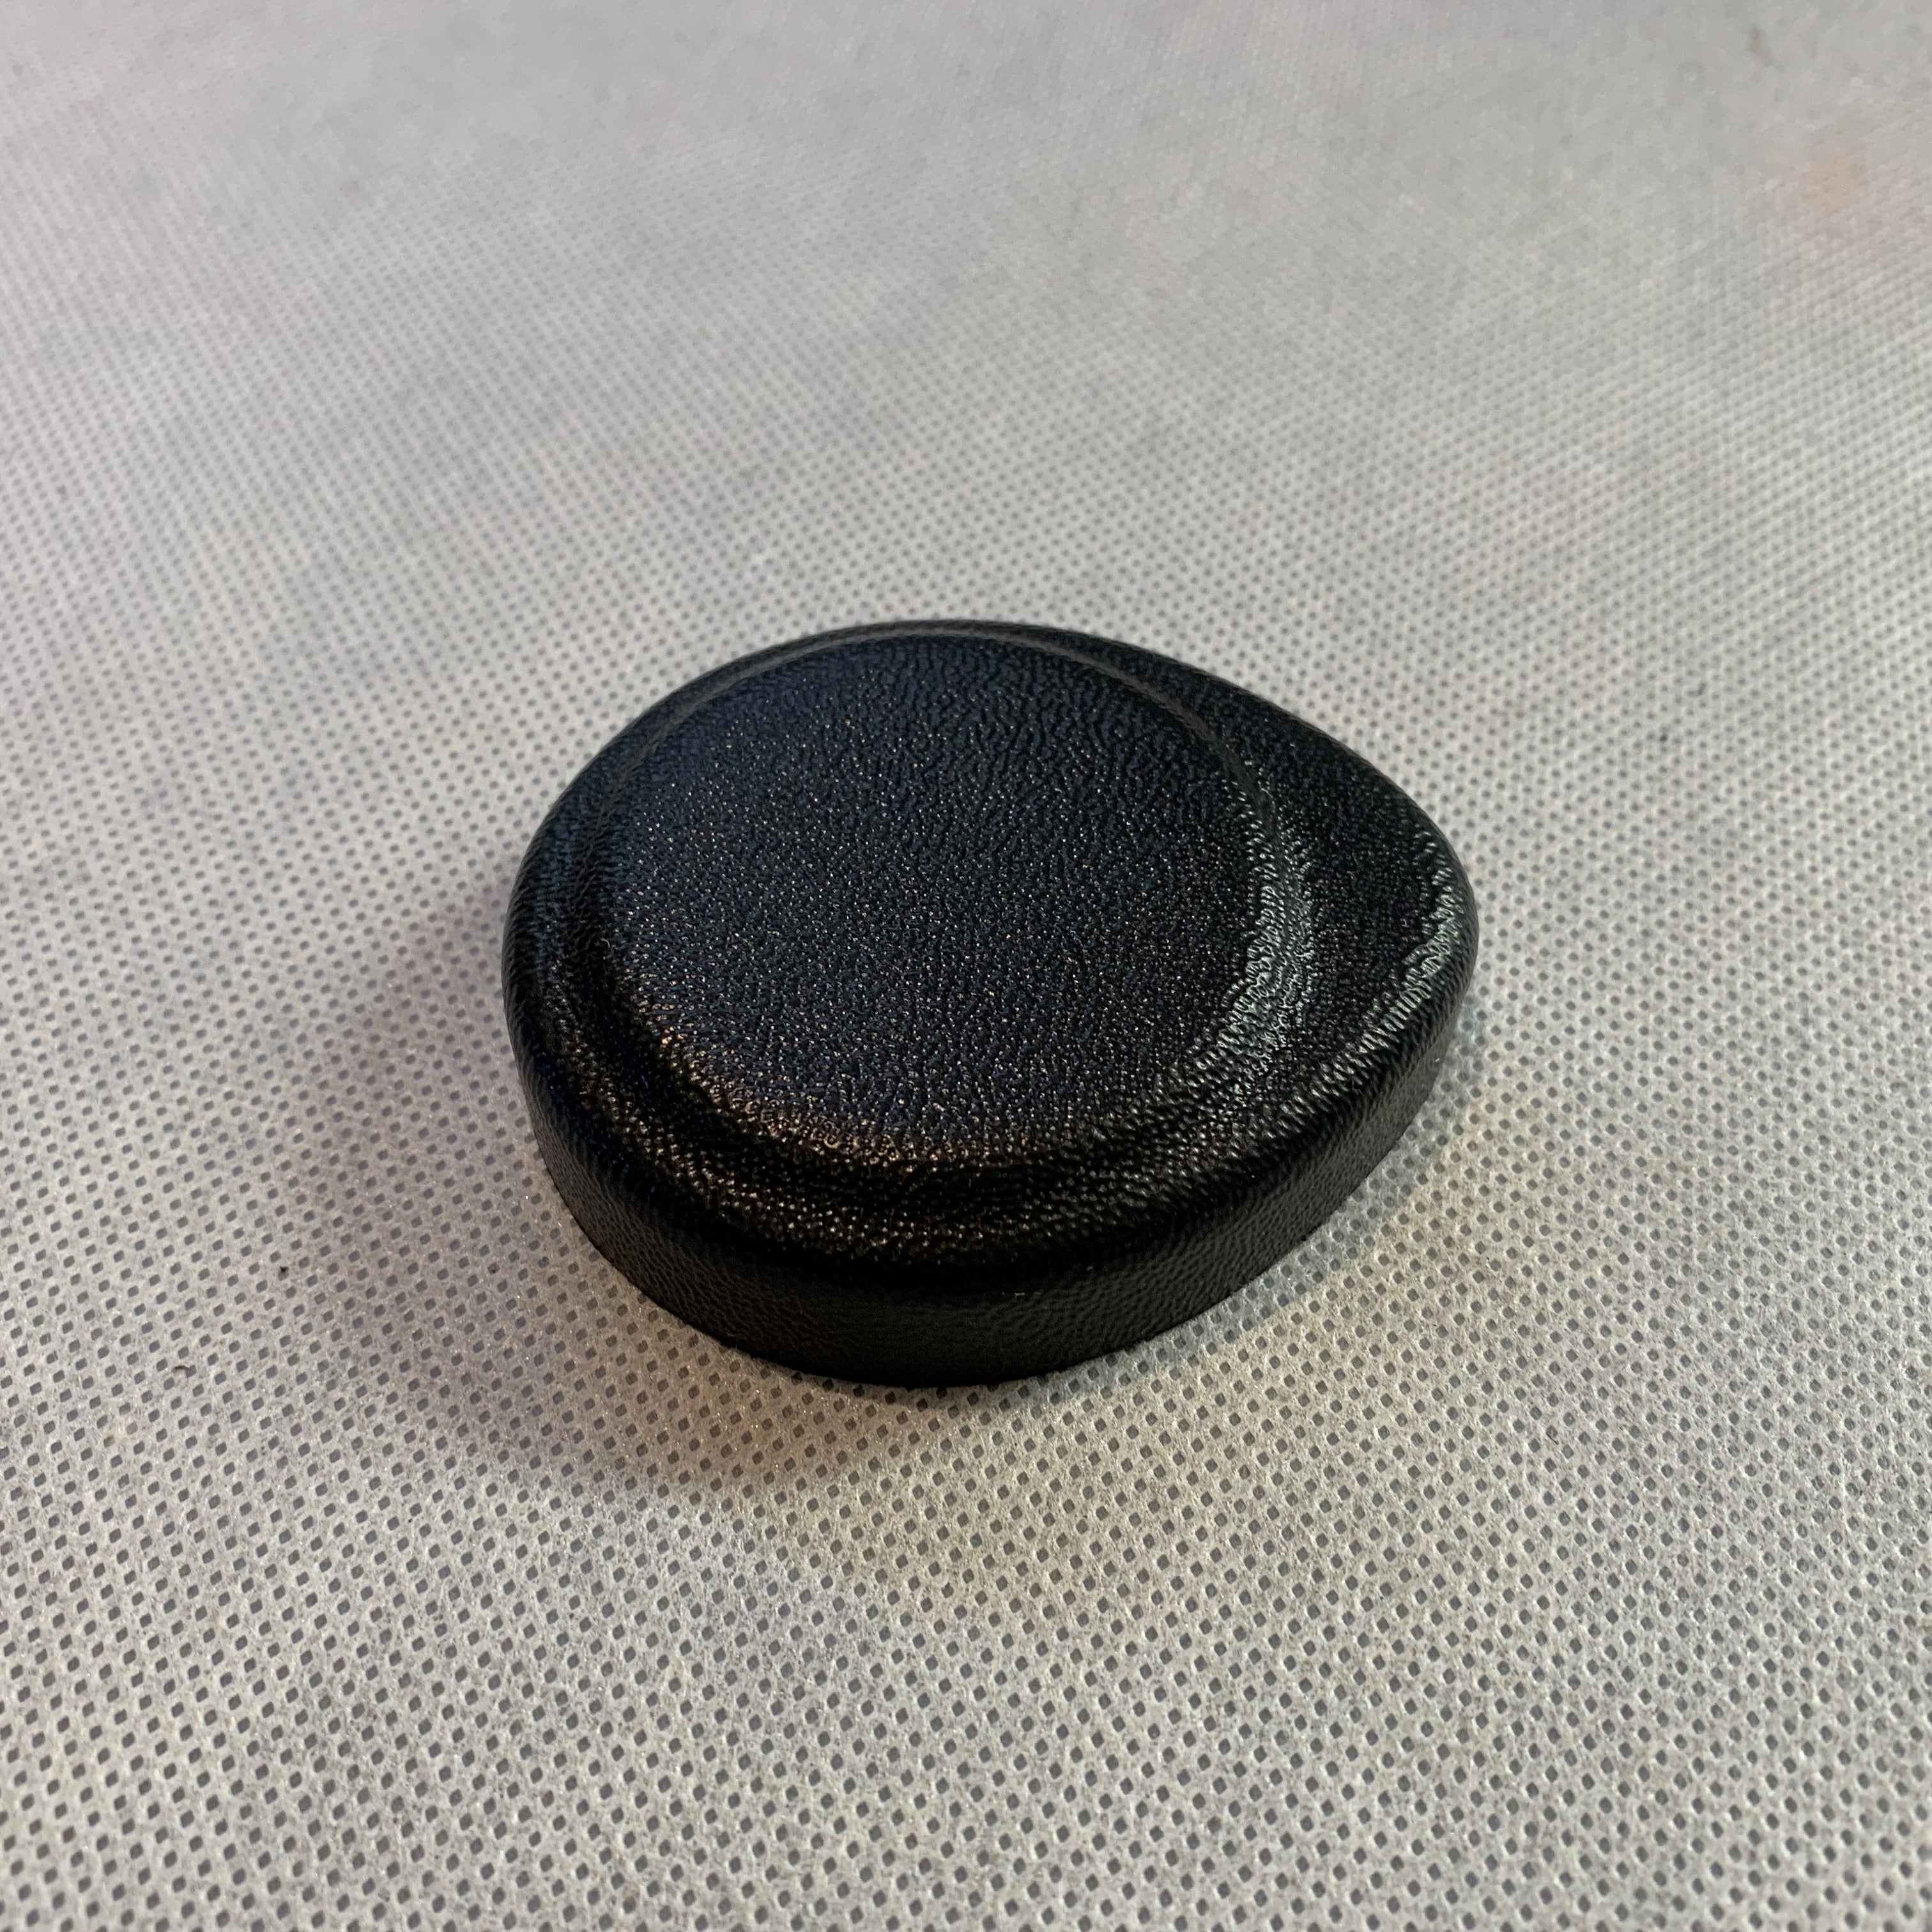 Proform Screen Washer Bottle Cap Cover - Mk7/7.5 Ford Fiesta (Plastic Finishes)